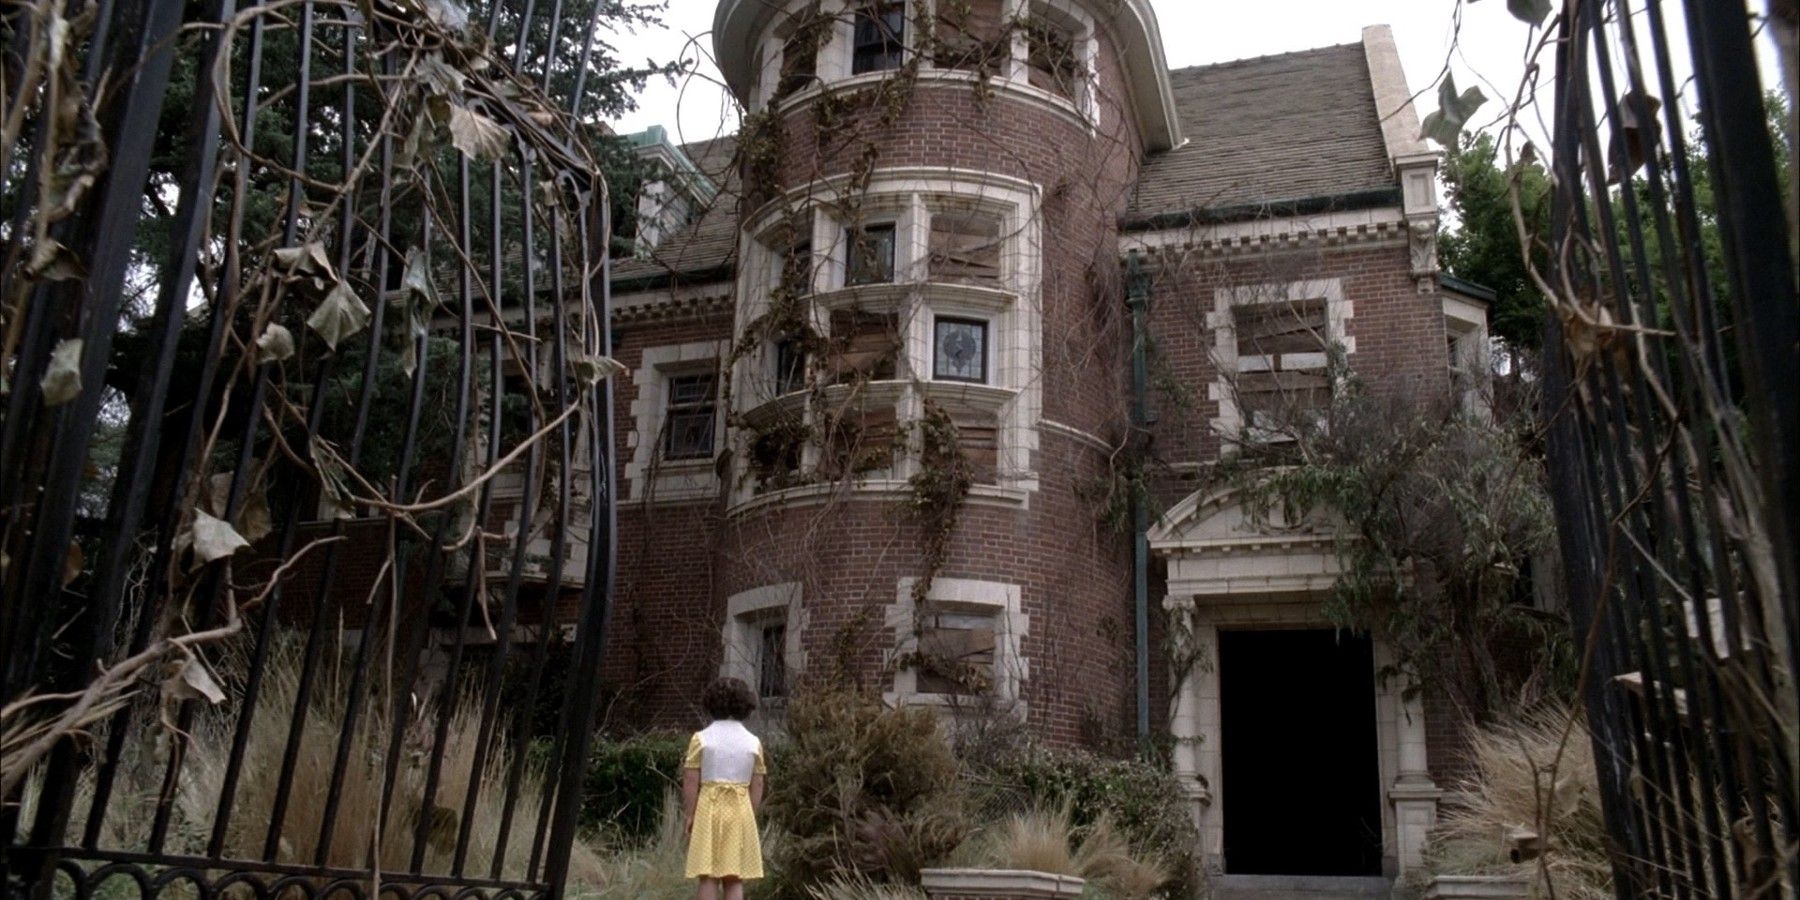 The house in season 1 of American Horror Story: Murder House